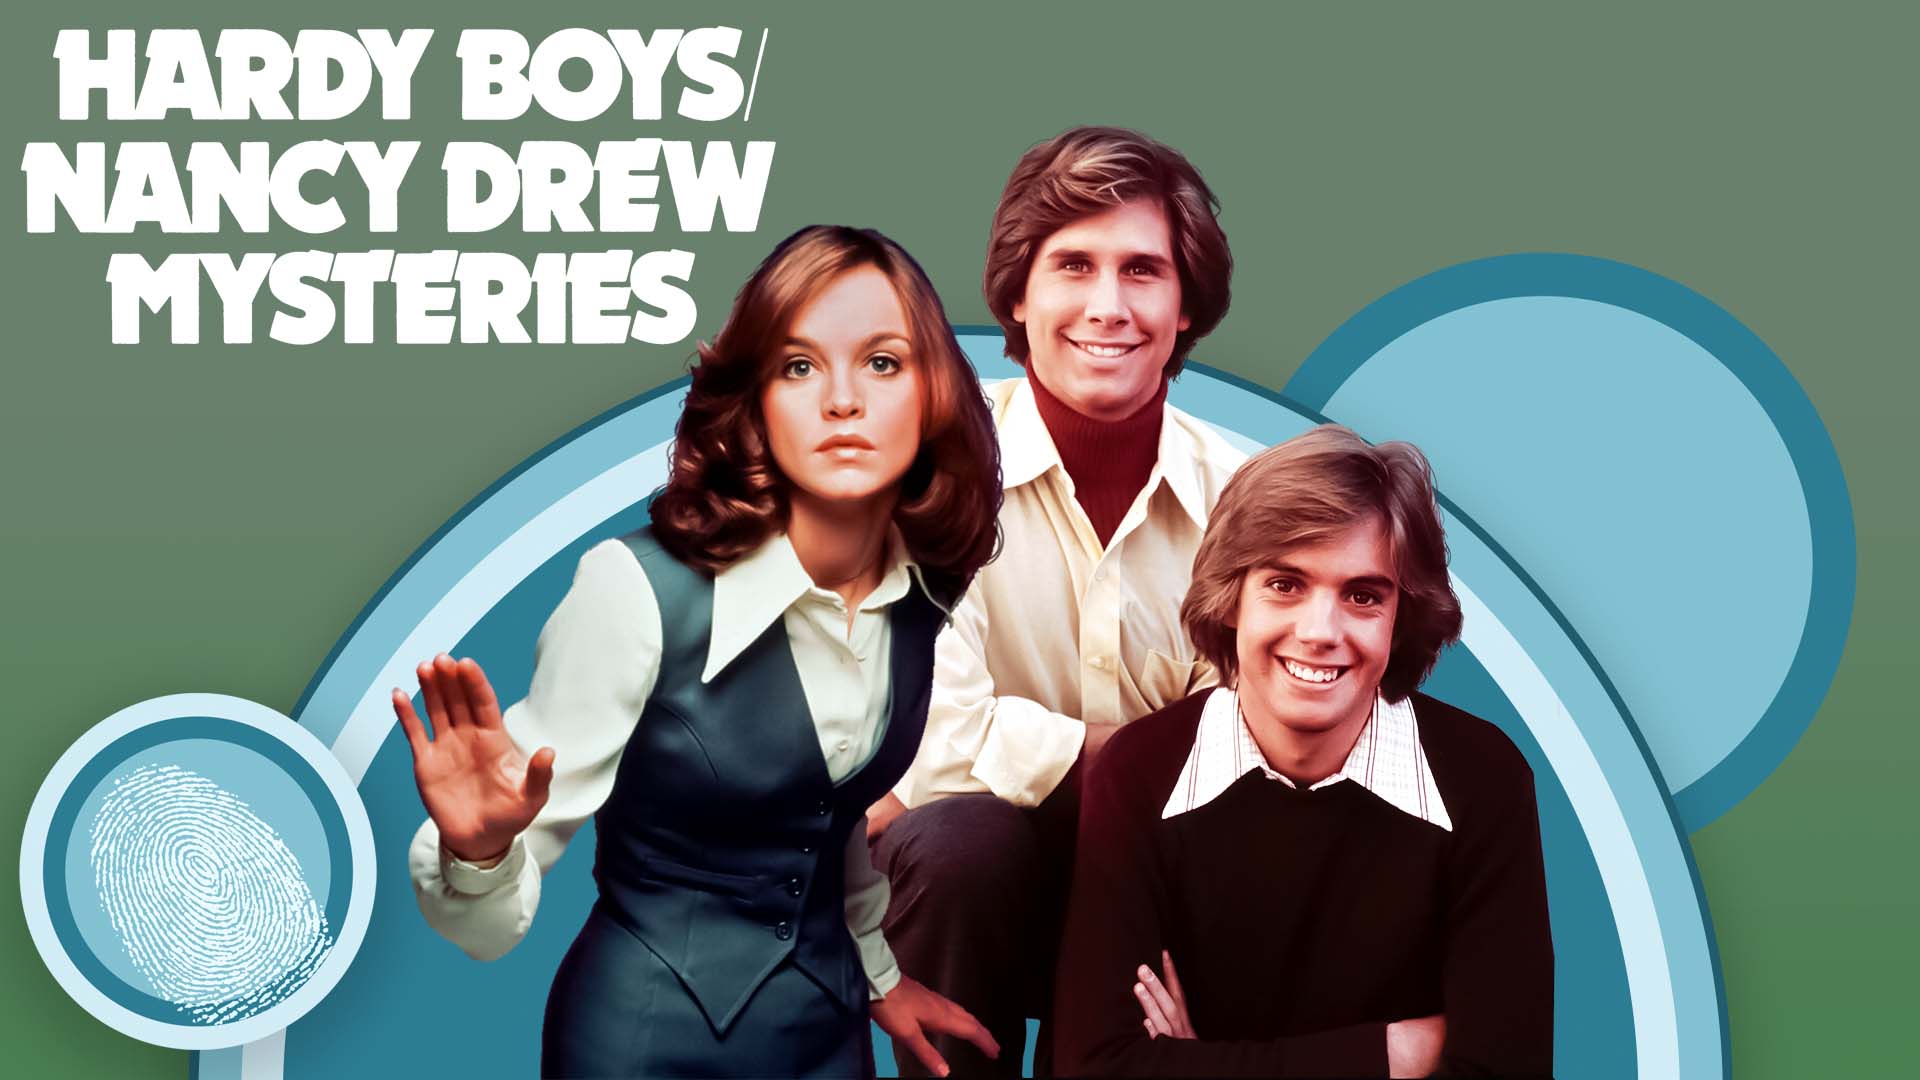 The Hardy Boys/Nancy Drew Mysteries on FREECABLE TV